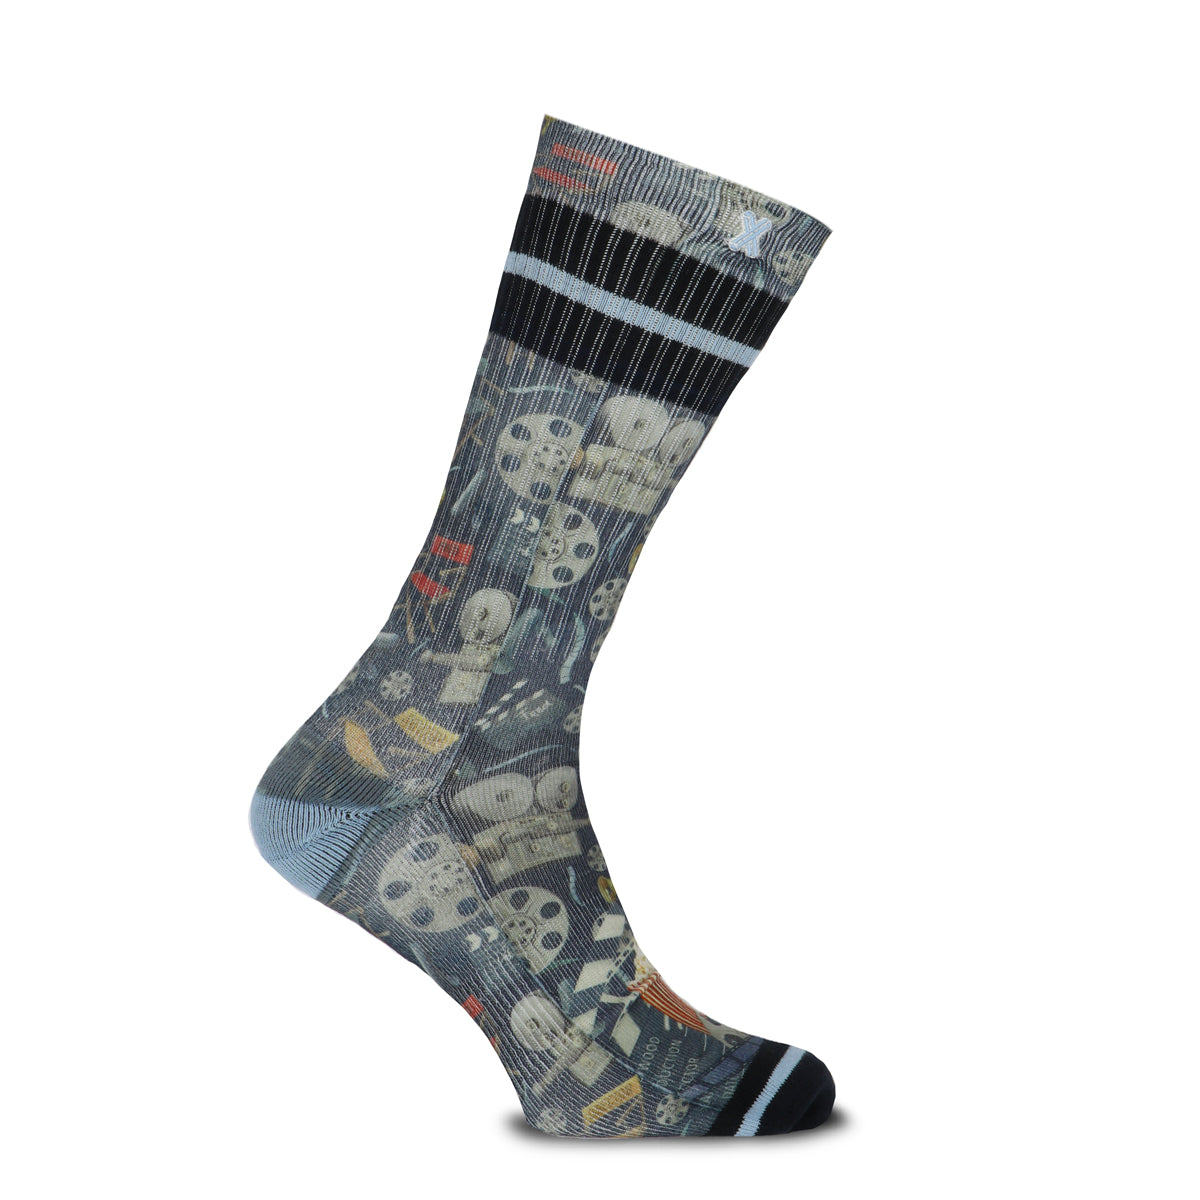 XPOOOS x AFNF Director chaussettes pour hommes